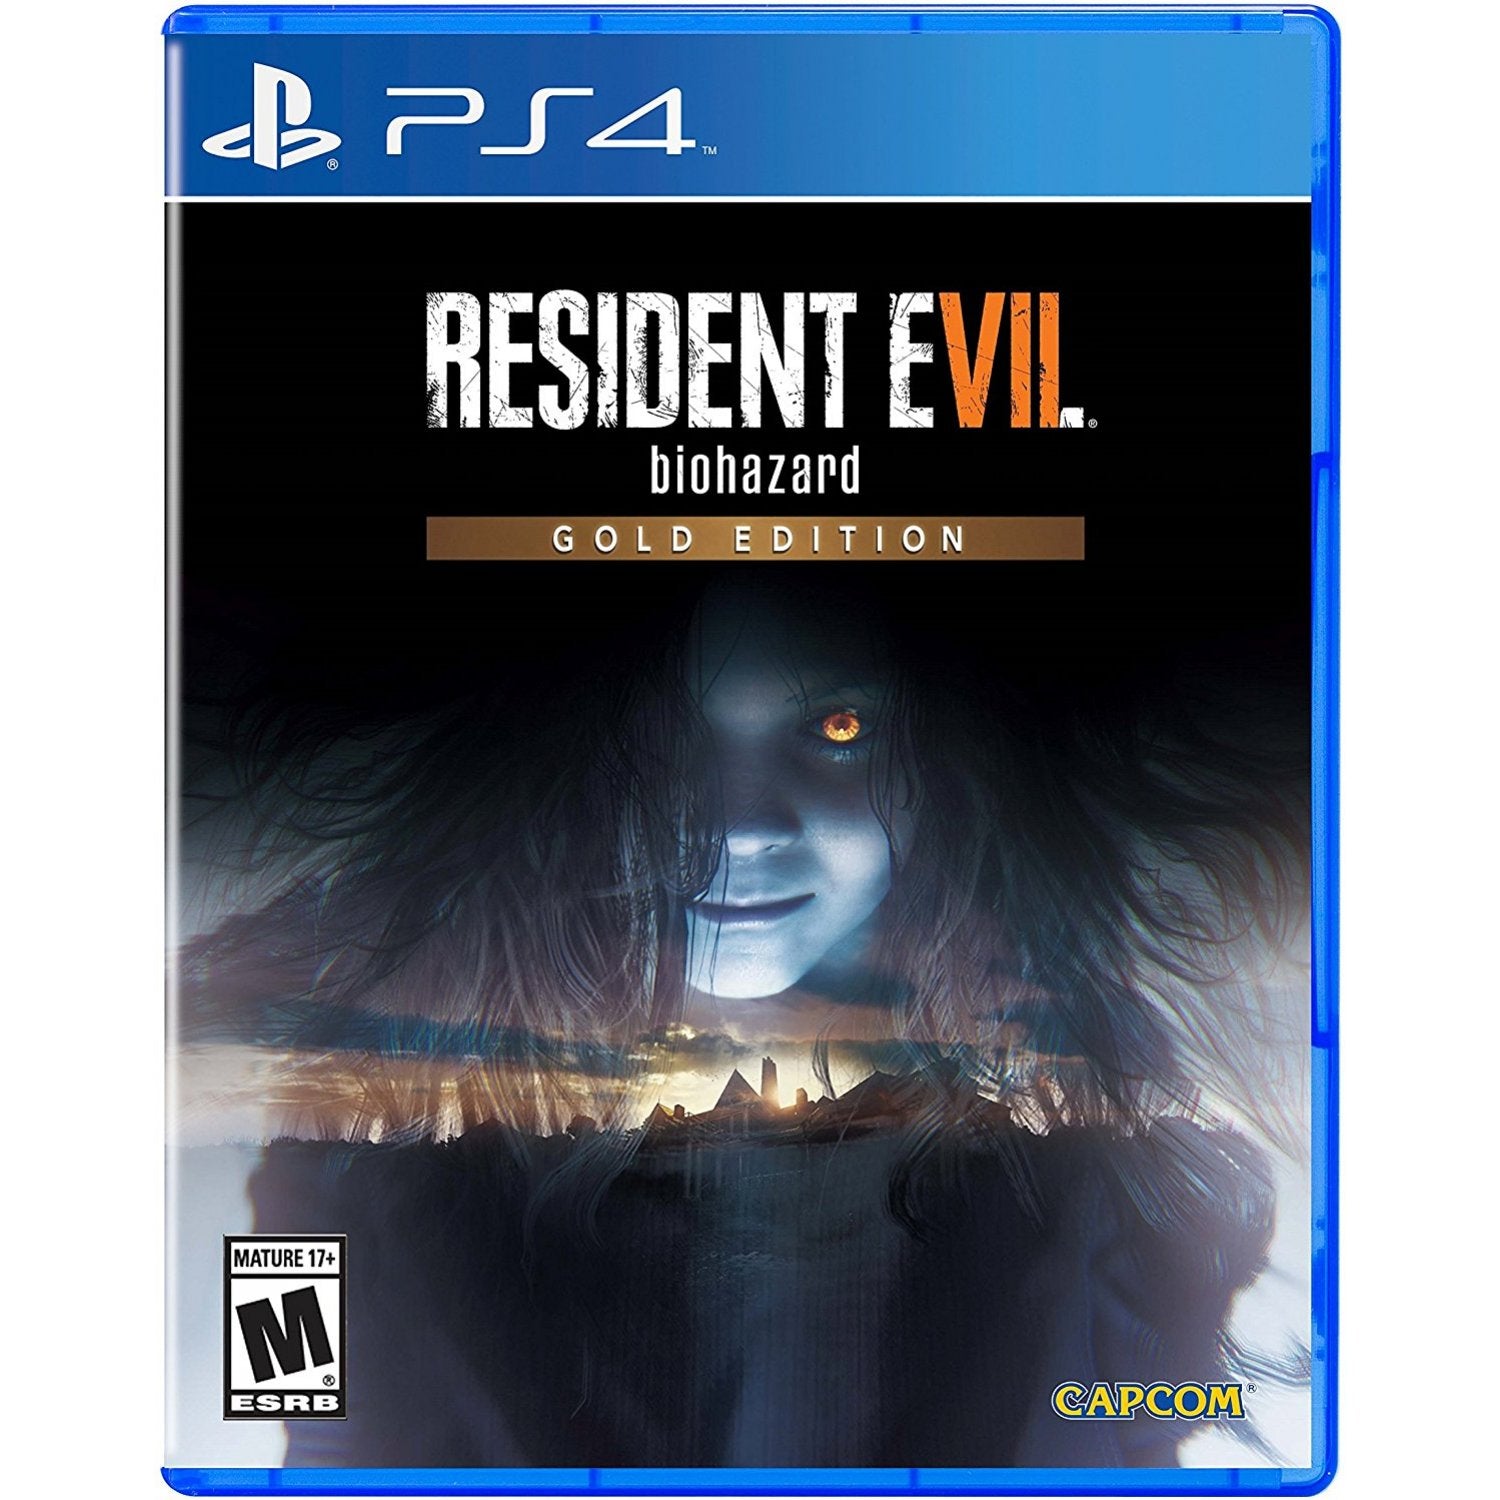 PS4 Resident Evil 7 Biohazard Gold Edition